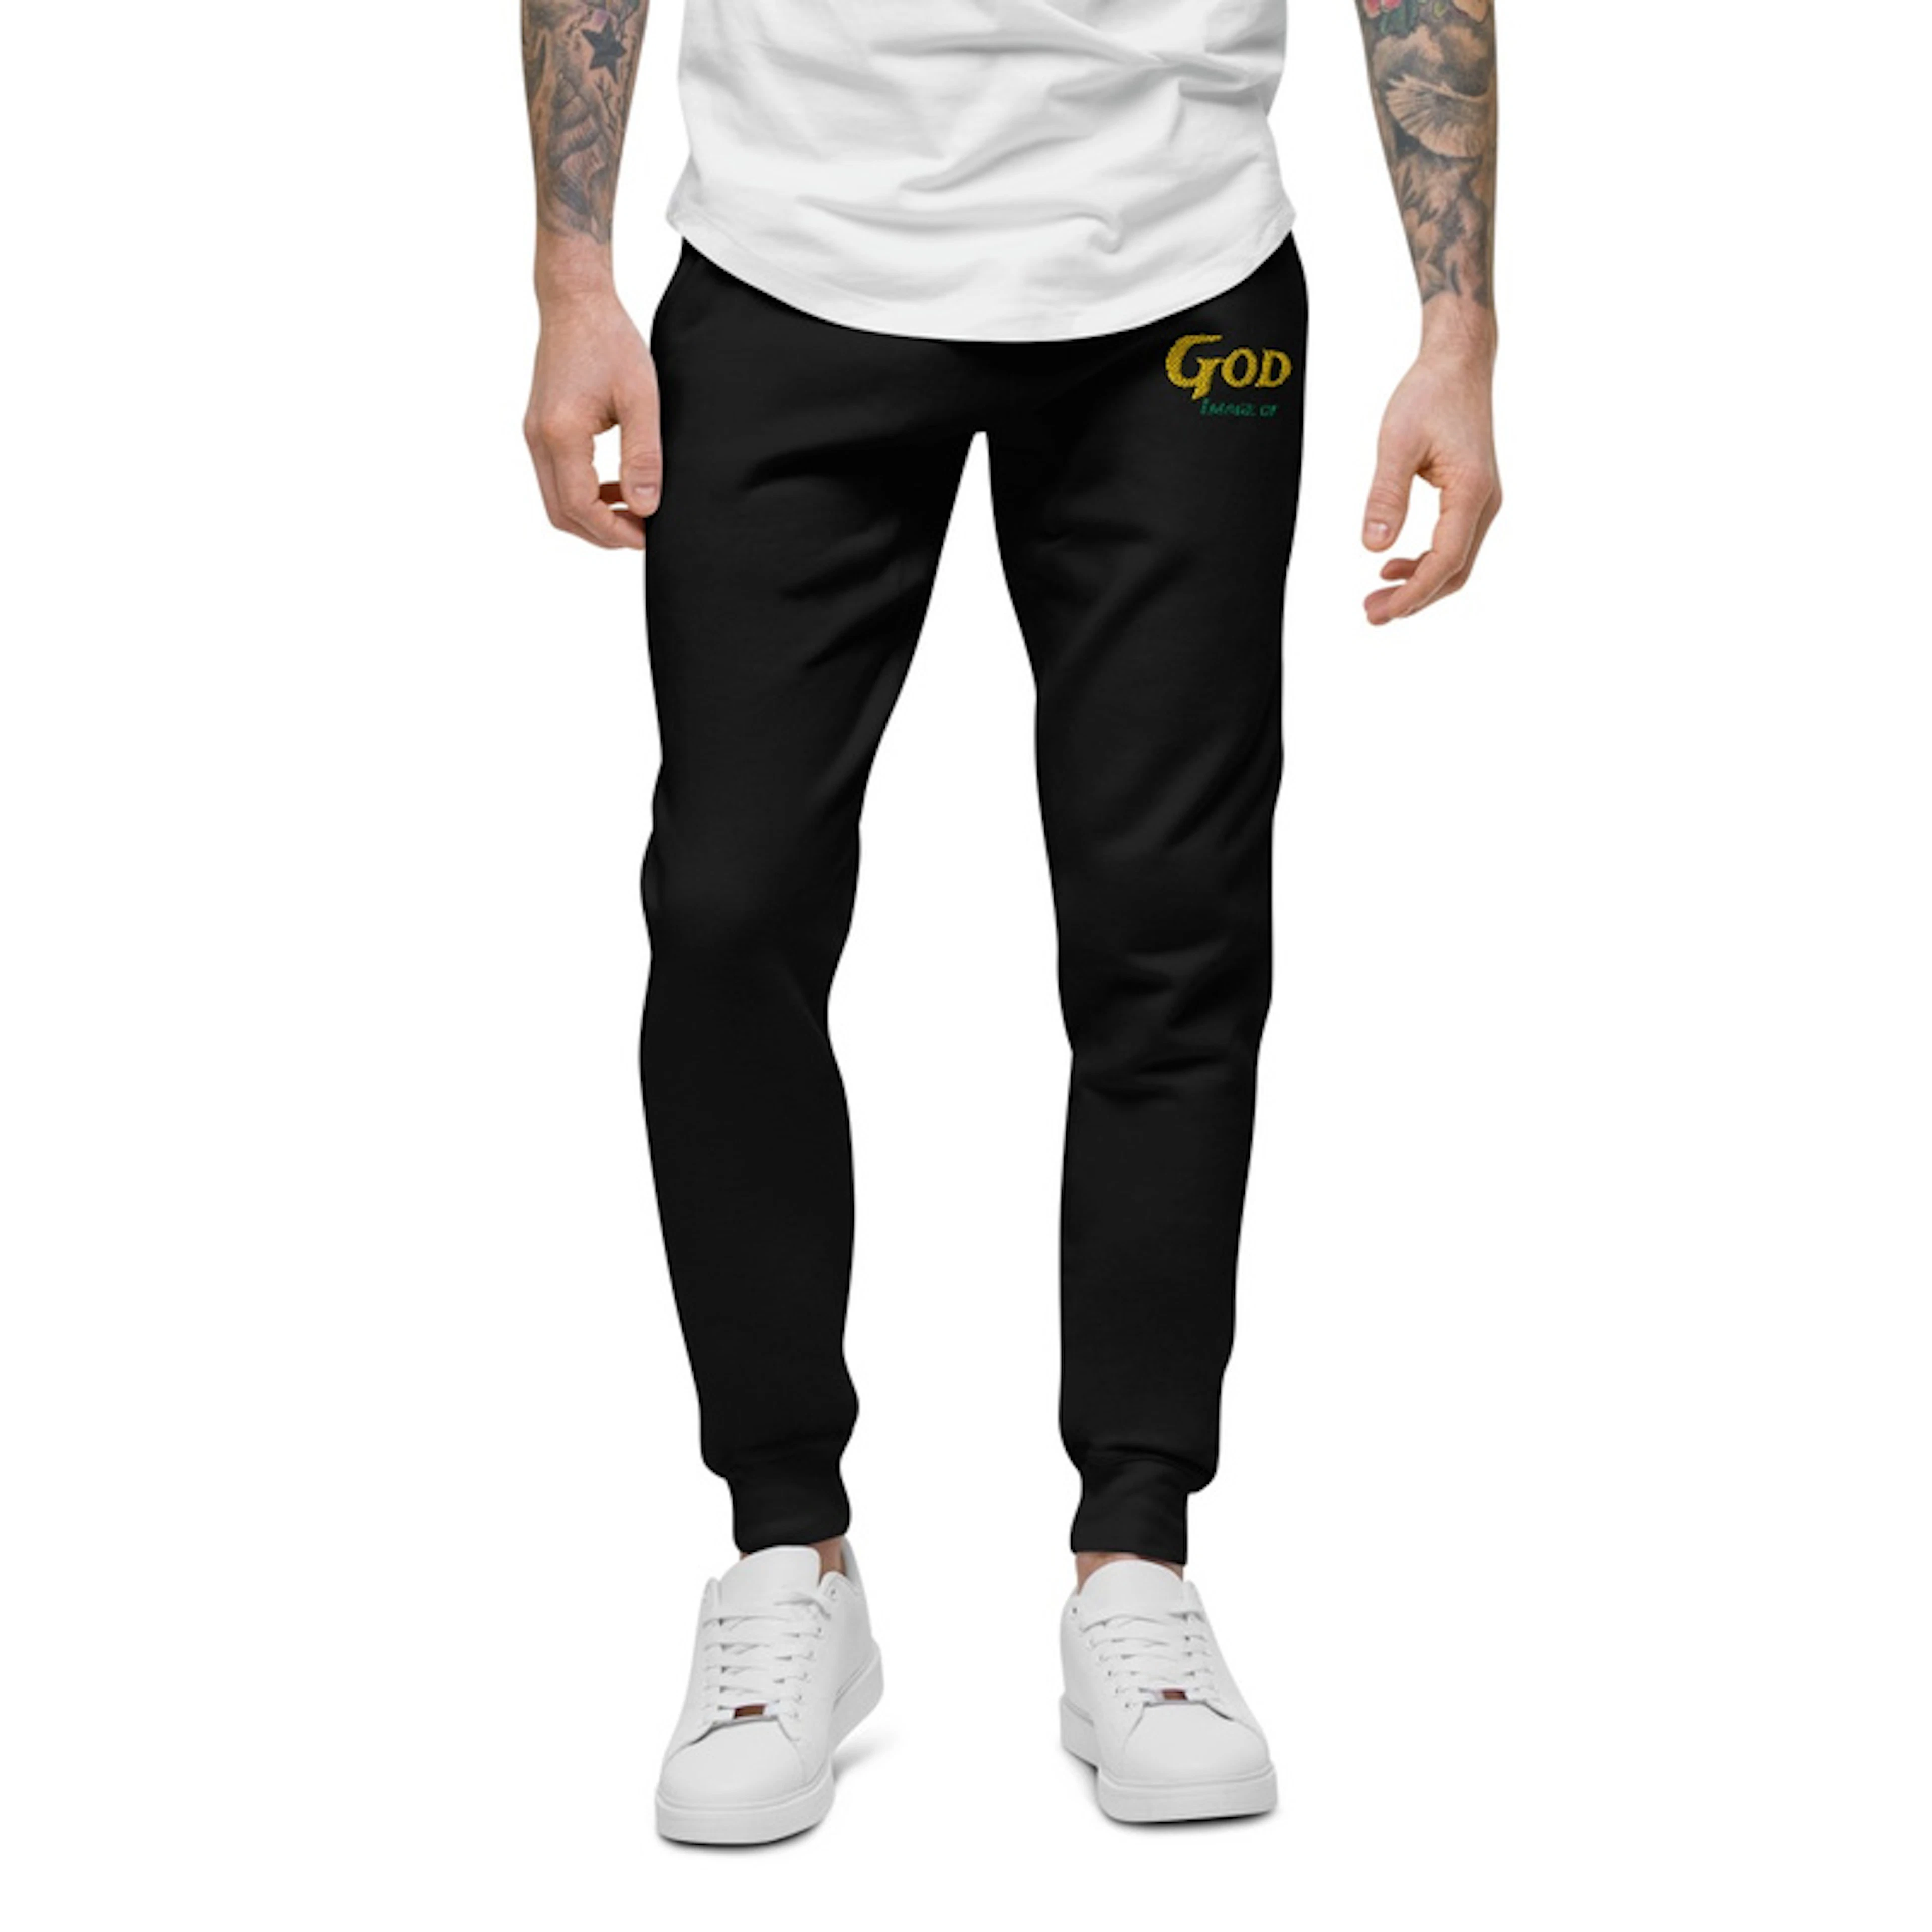 Image of GOD joggers limited (yellow)